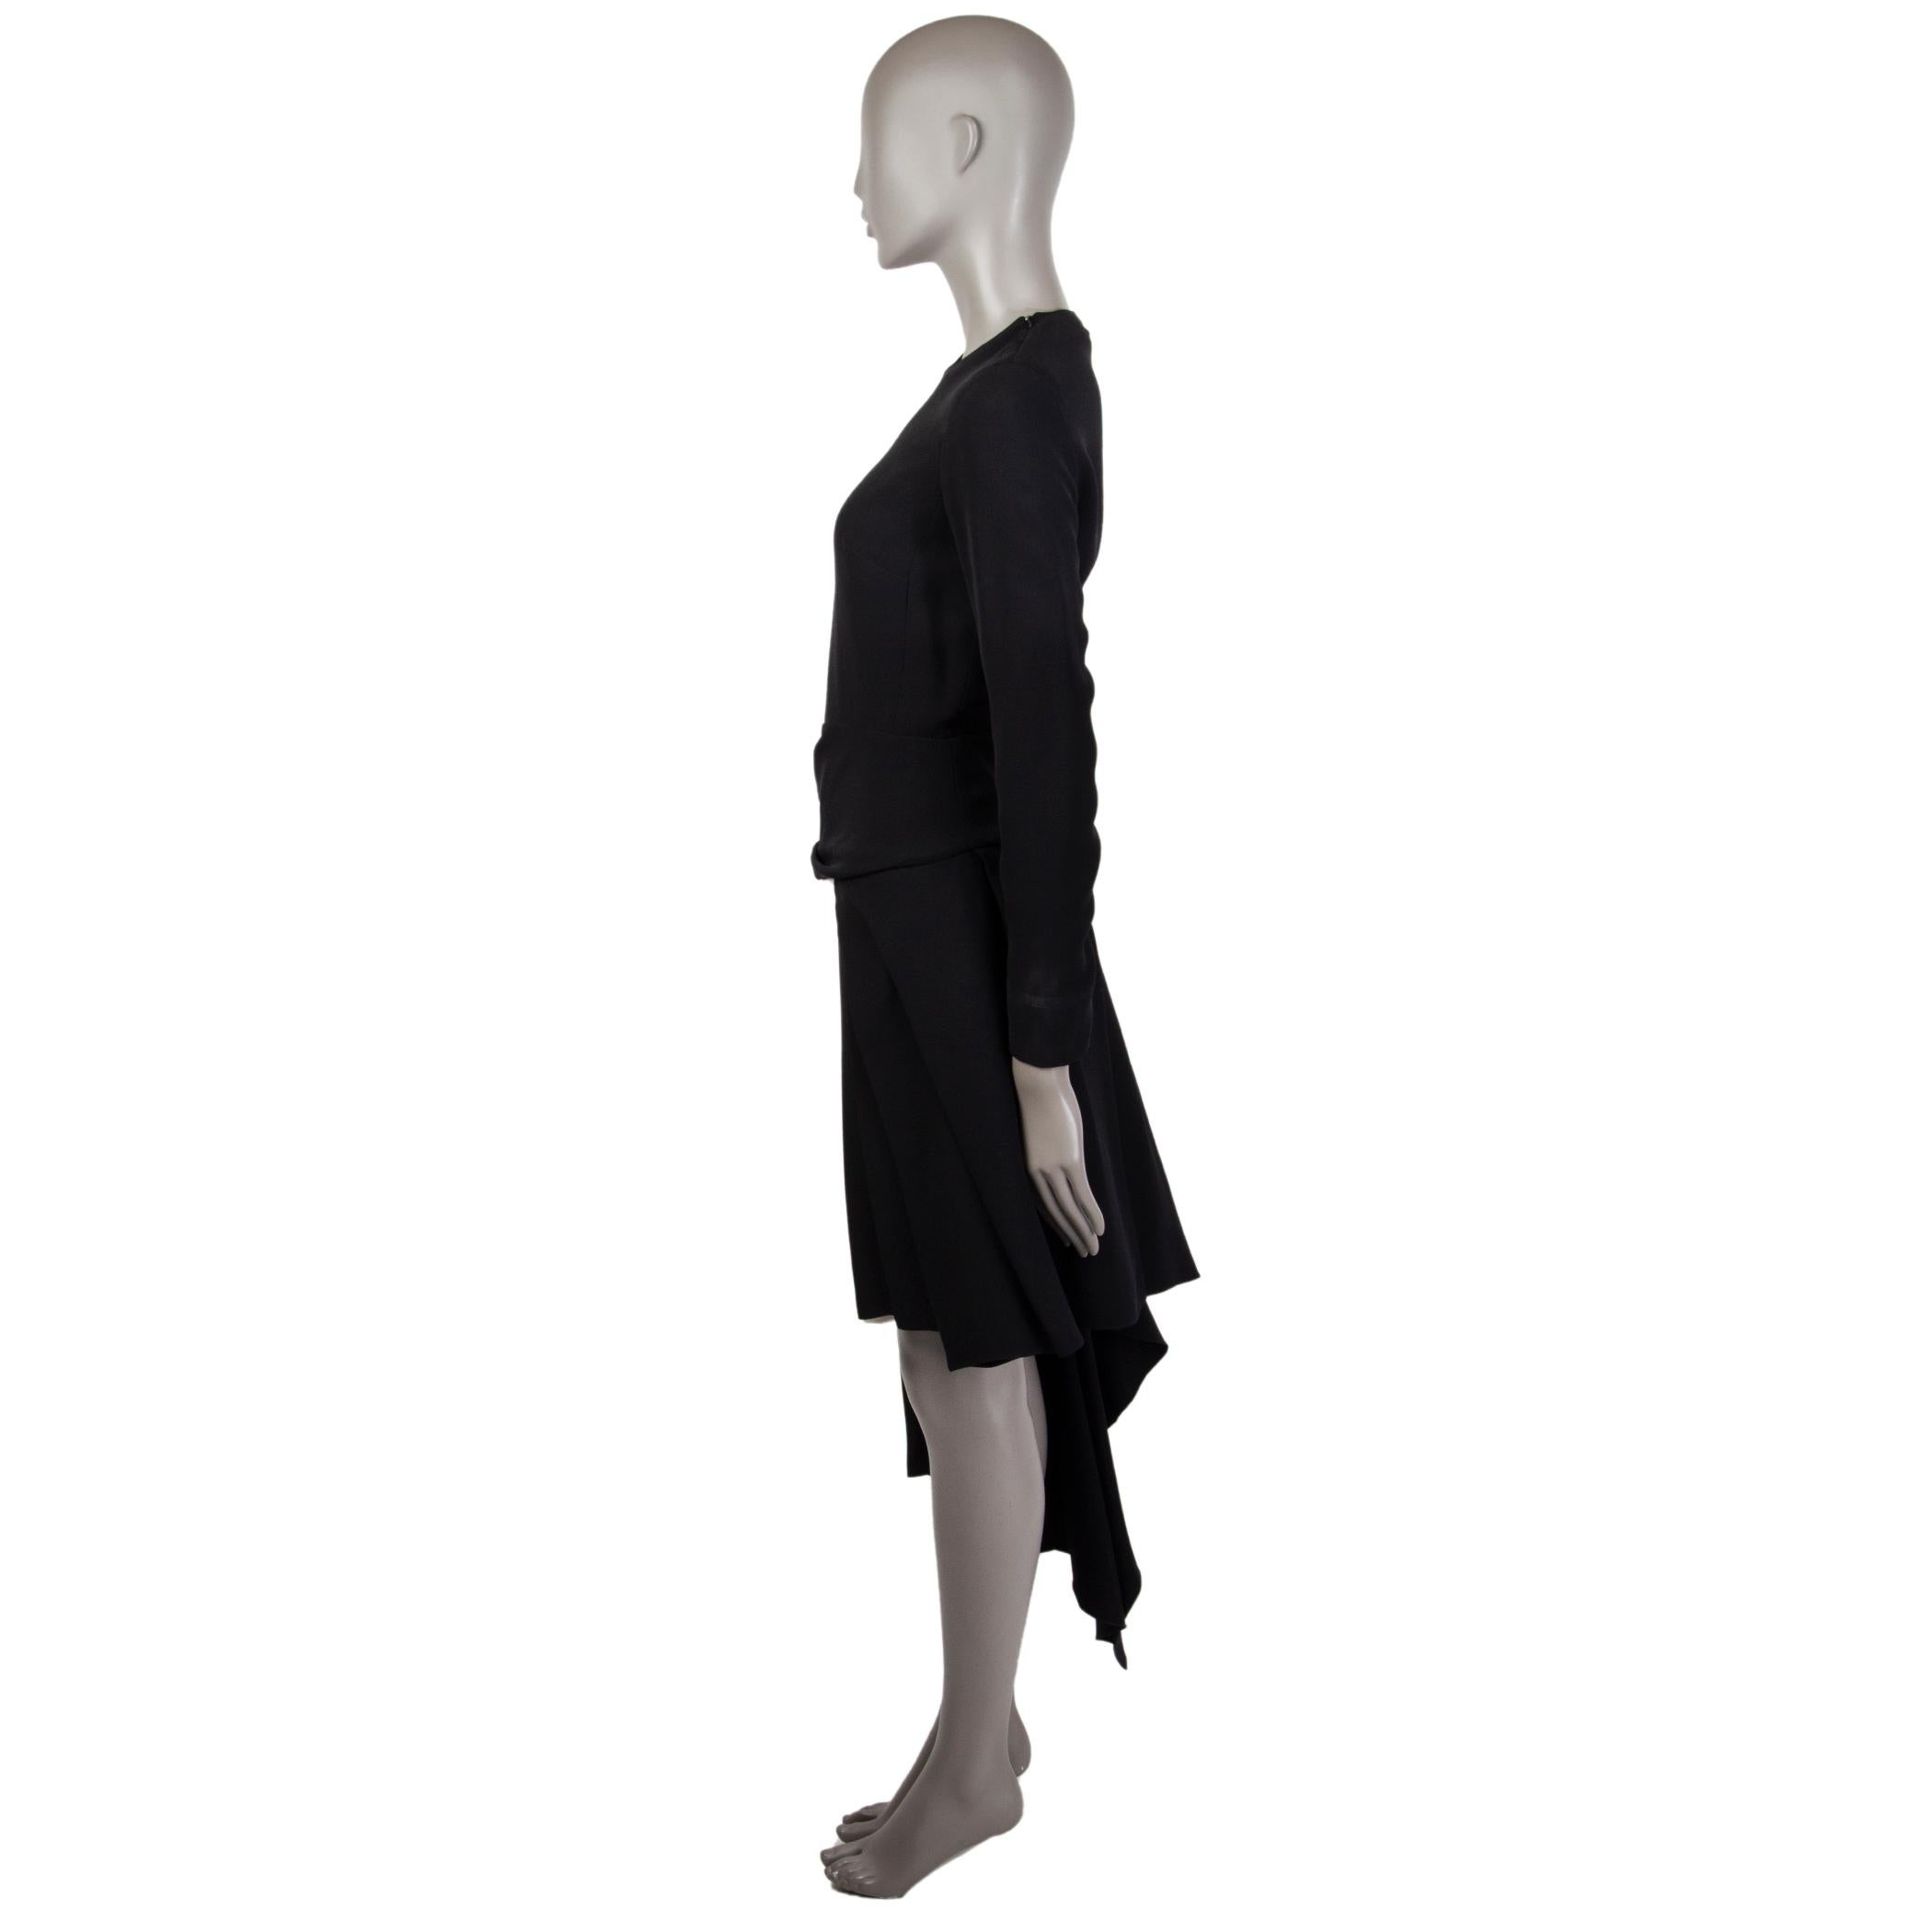 Christian Dior long-sleeve dress in black and off-white silk (100%) with a round neck. Has an asymmetrical drape-pleated detail. Closes on the side, at the cuffs and on each end of its shoulders with a concealed zipper. Lined in silk (100%). Has